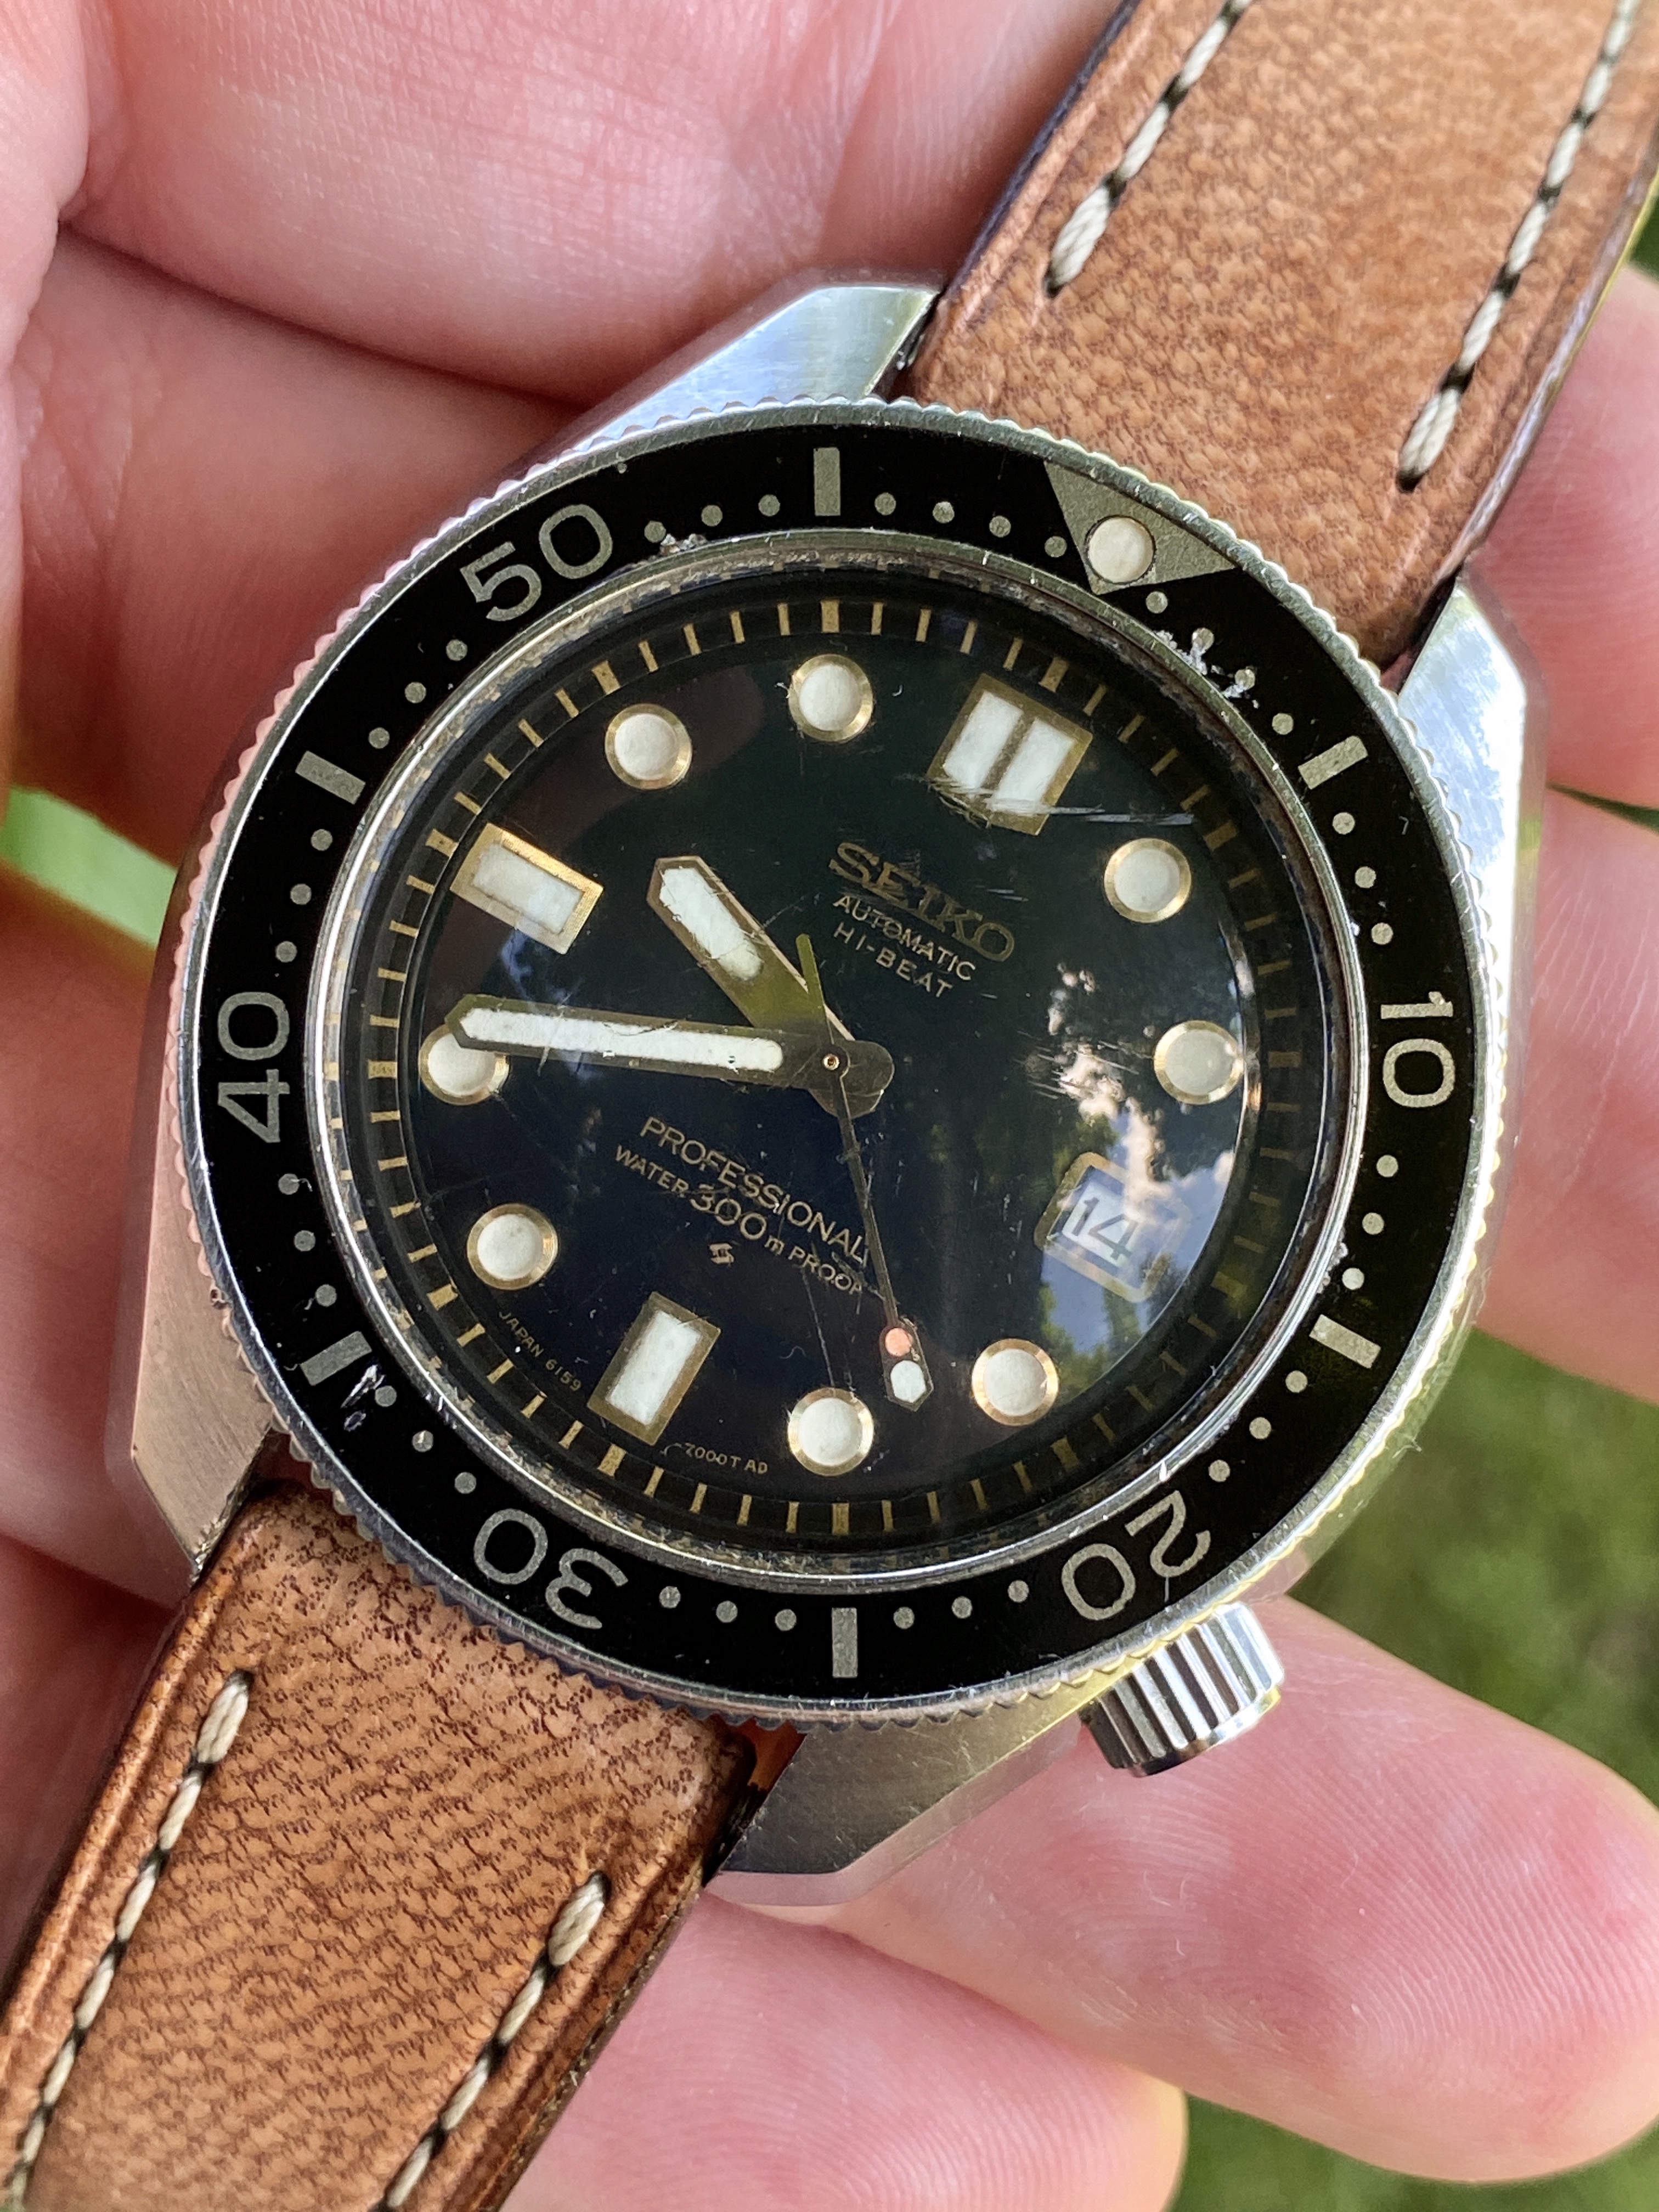 My End-Game Seiko: ref. 6159-7000 | Omega Forums